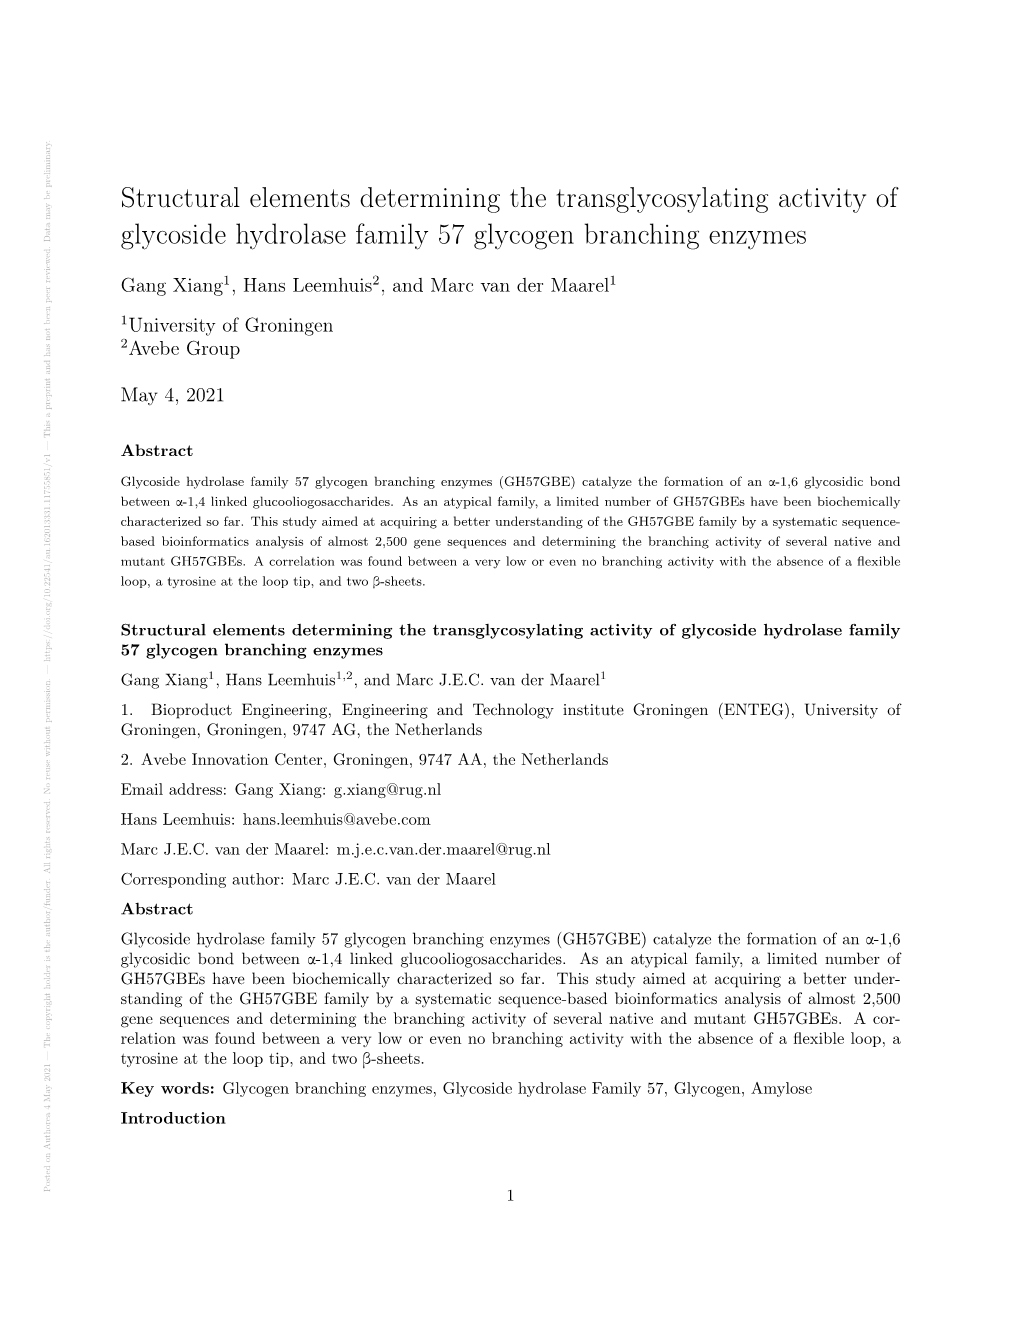 Structural Elements Determining the Transglycosylating Activity Of